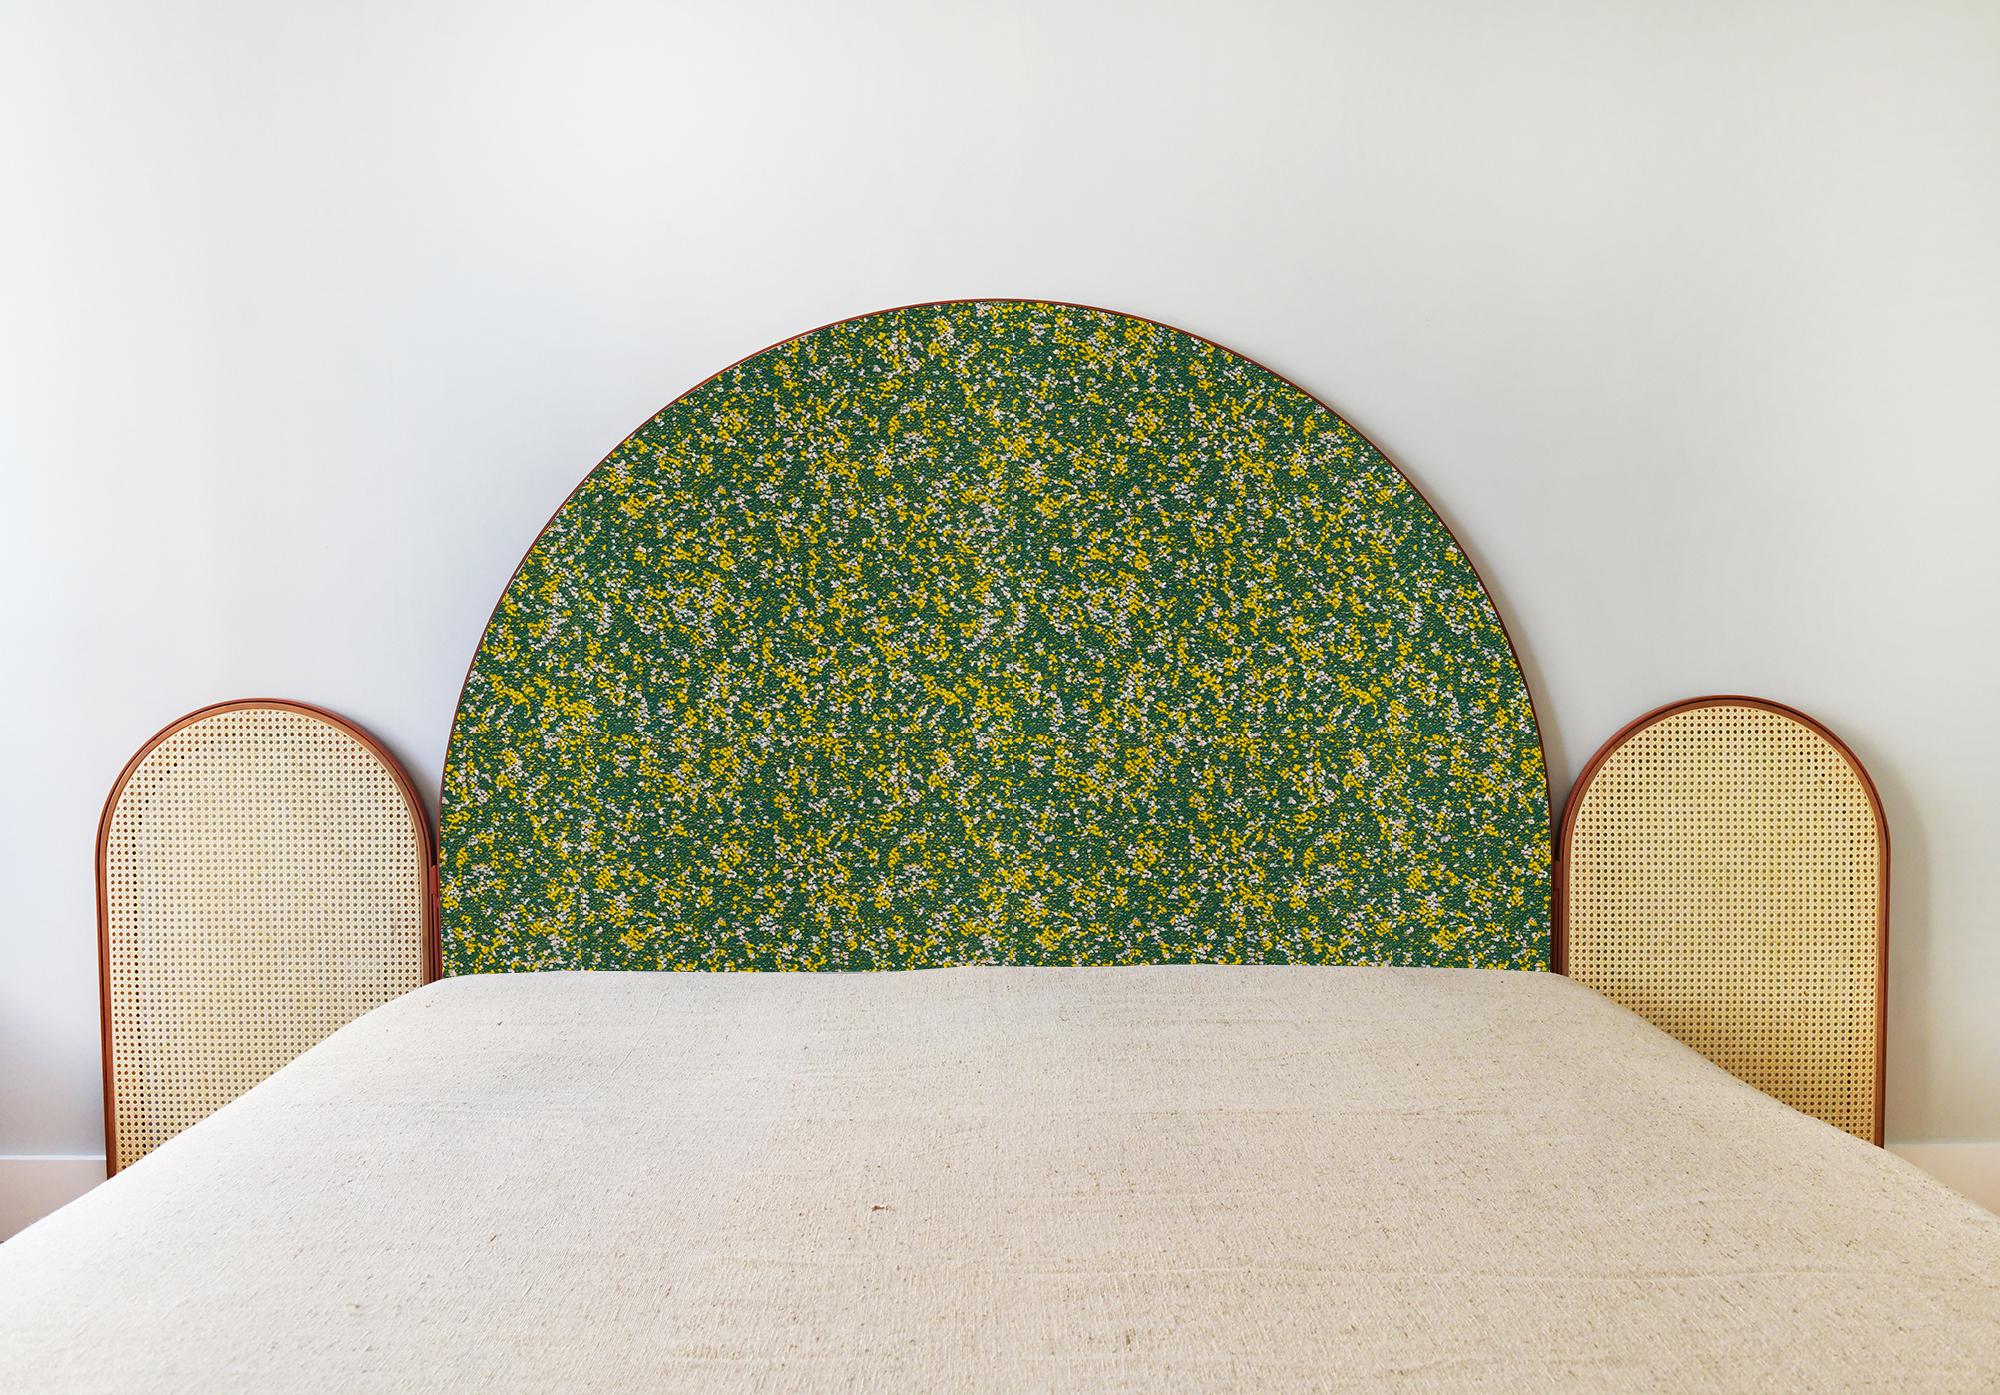 “Paravent Ideal” is a handcrafted, screen headboard made by artisans in Turkey, preserving and sustaining traditional Turkish handcrafts. The central large arc is upholstered in Kvadrat fabric Atom, which comes in beige, green and purple colors. The